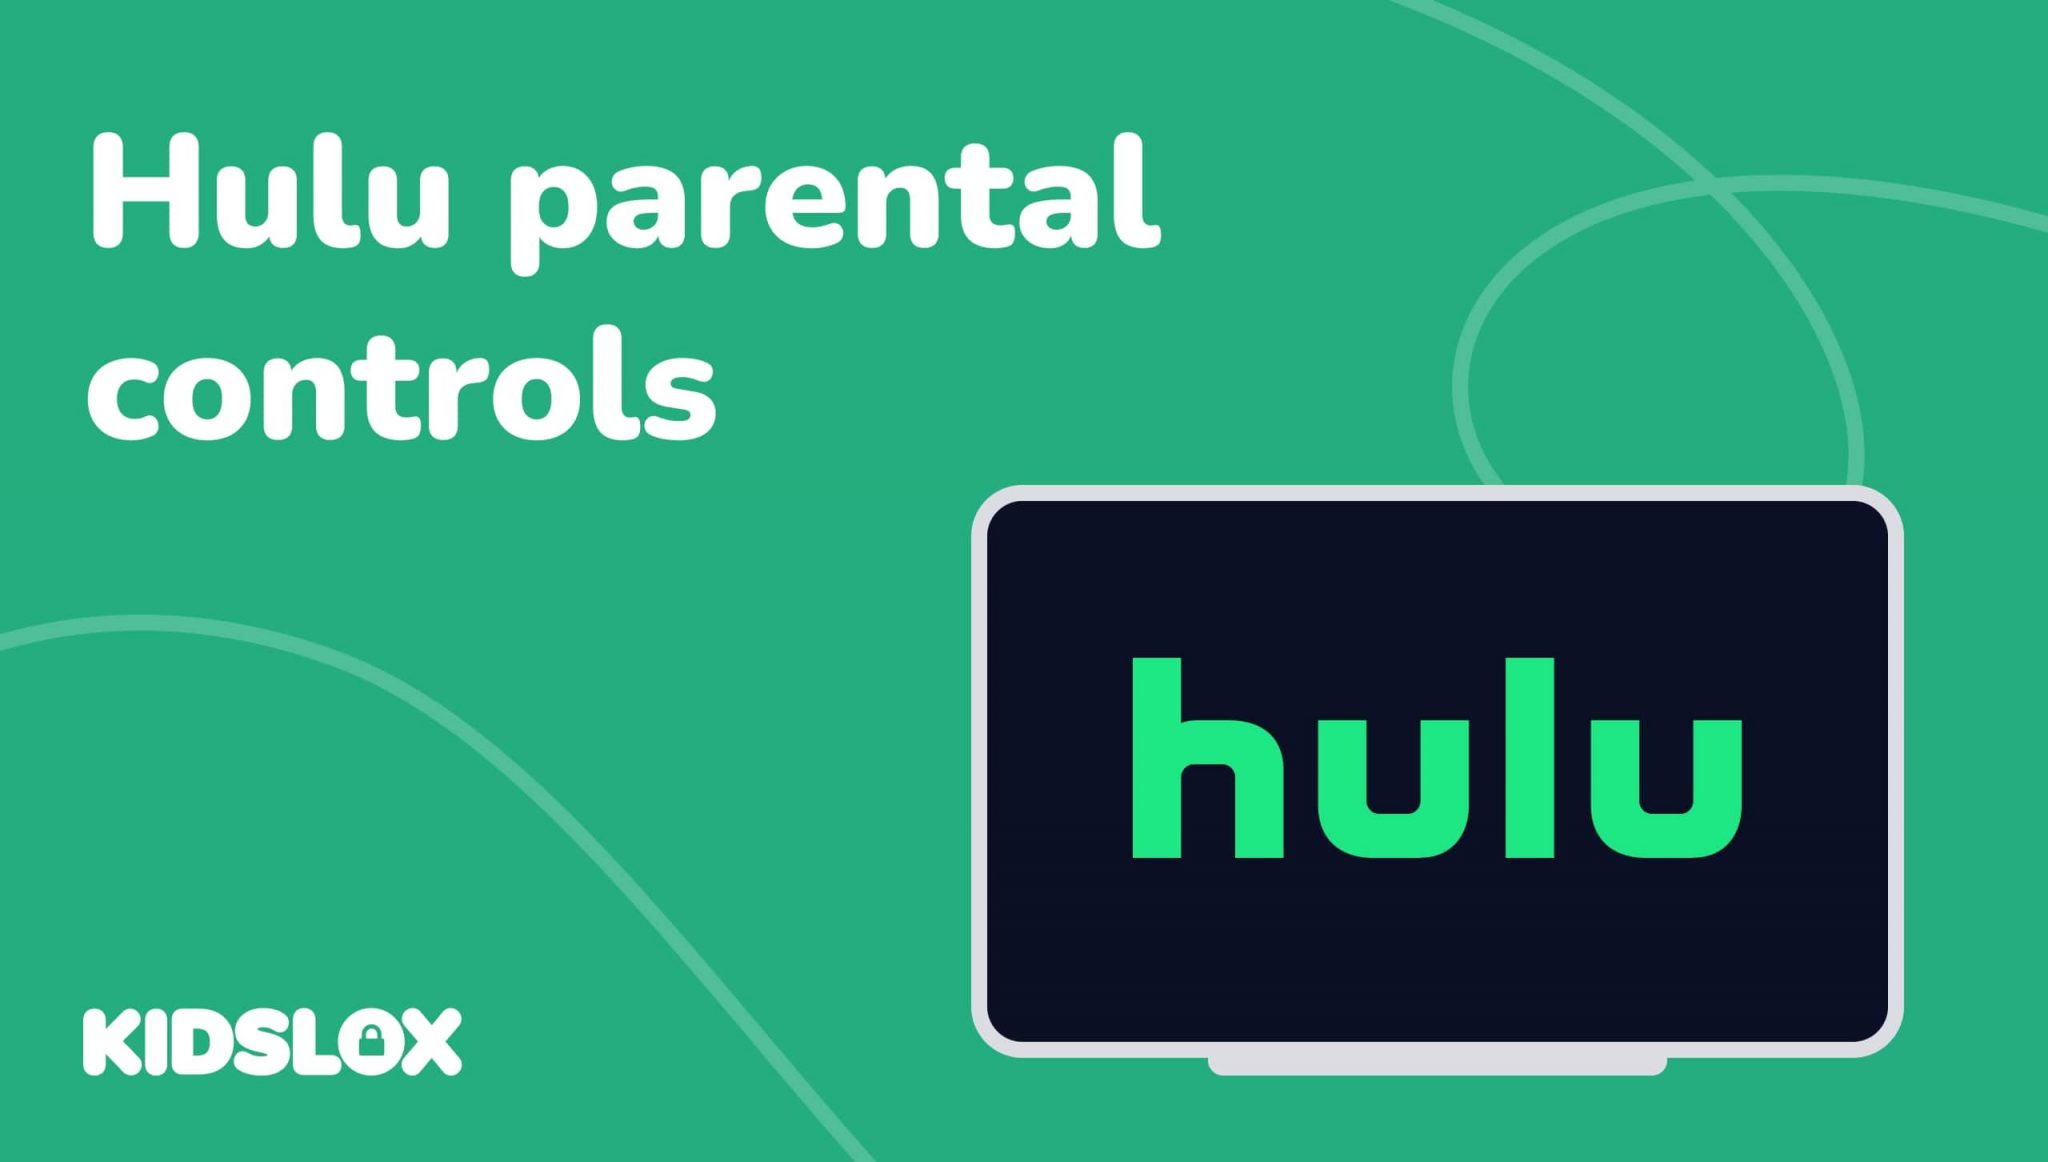 How to use Hulu parental controls a practical guide Kidslox